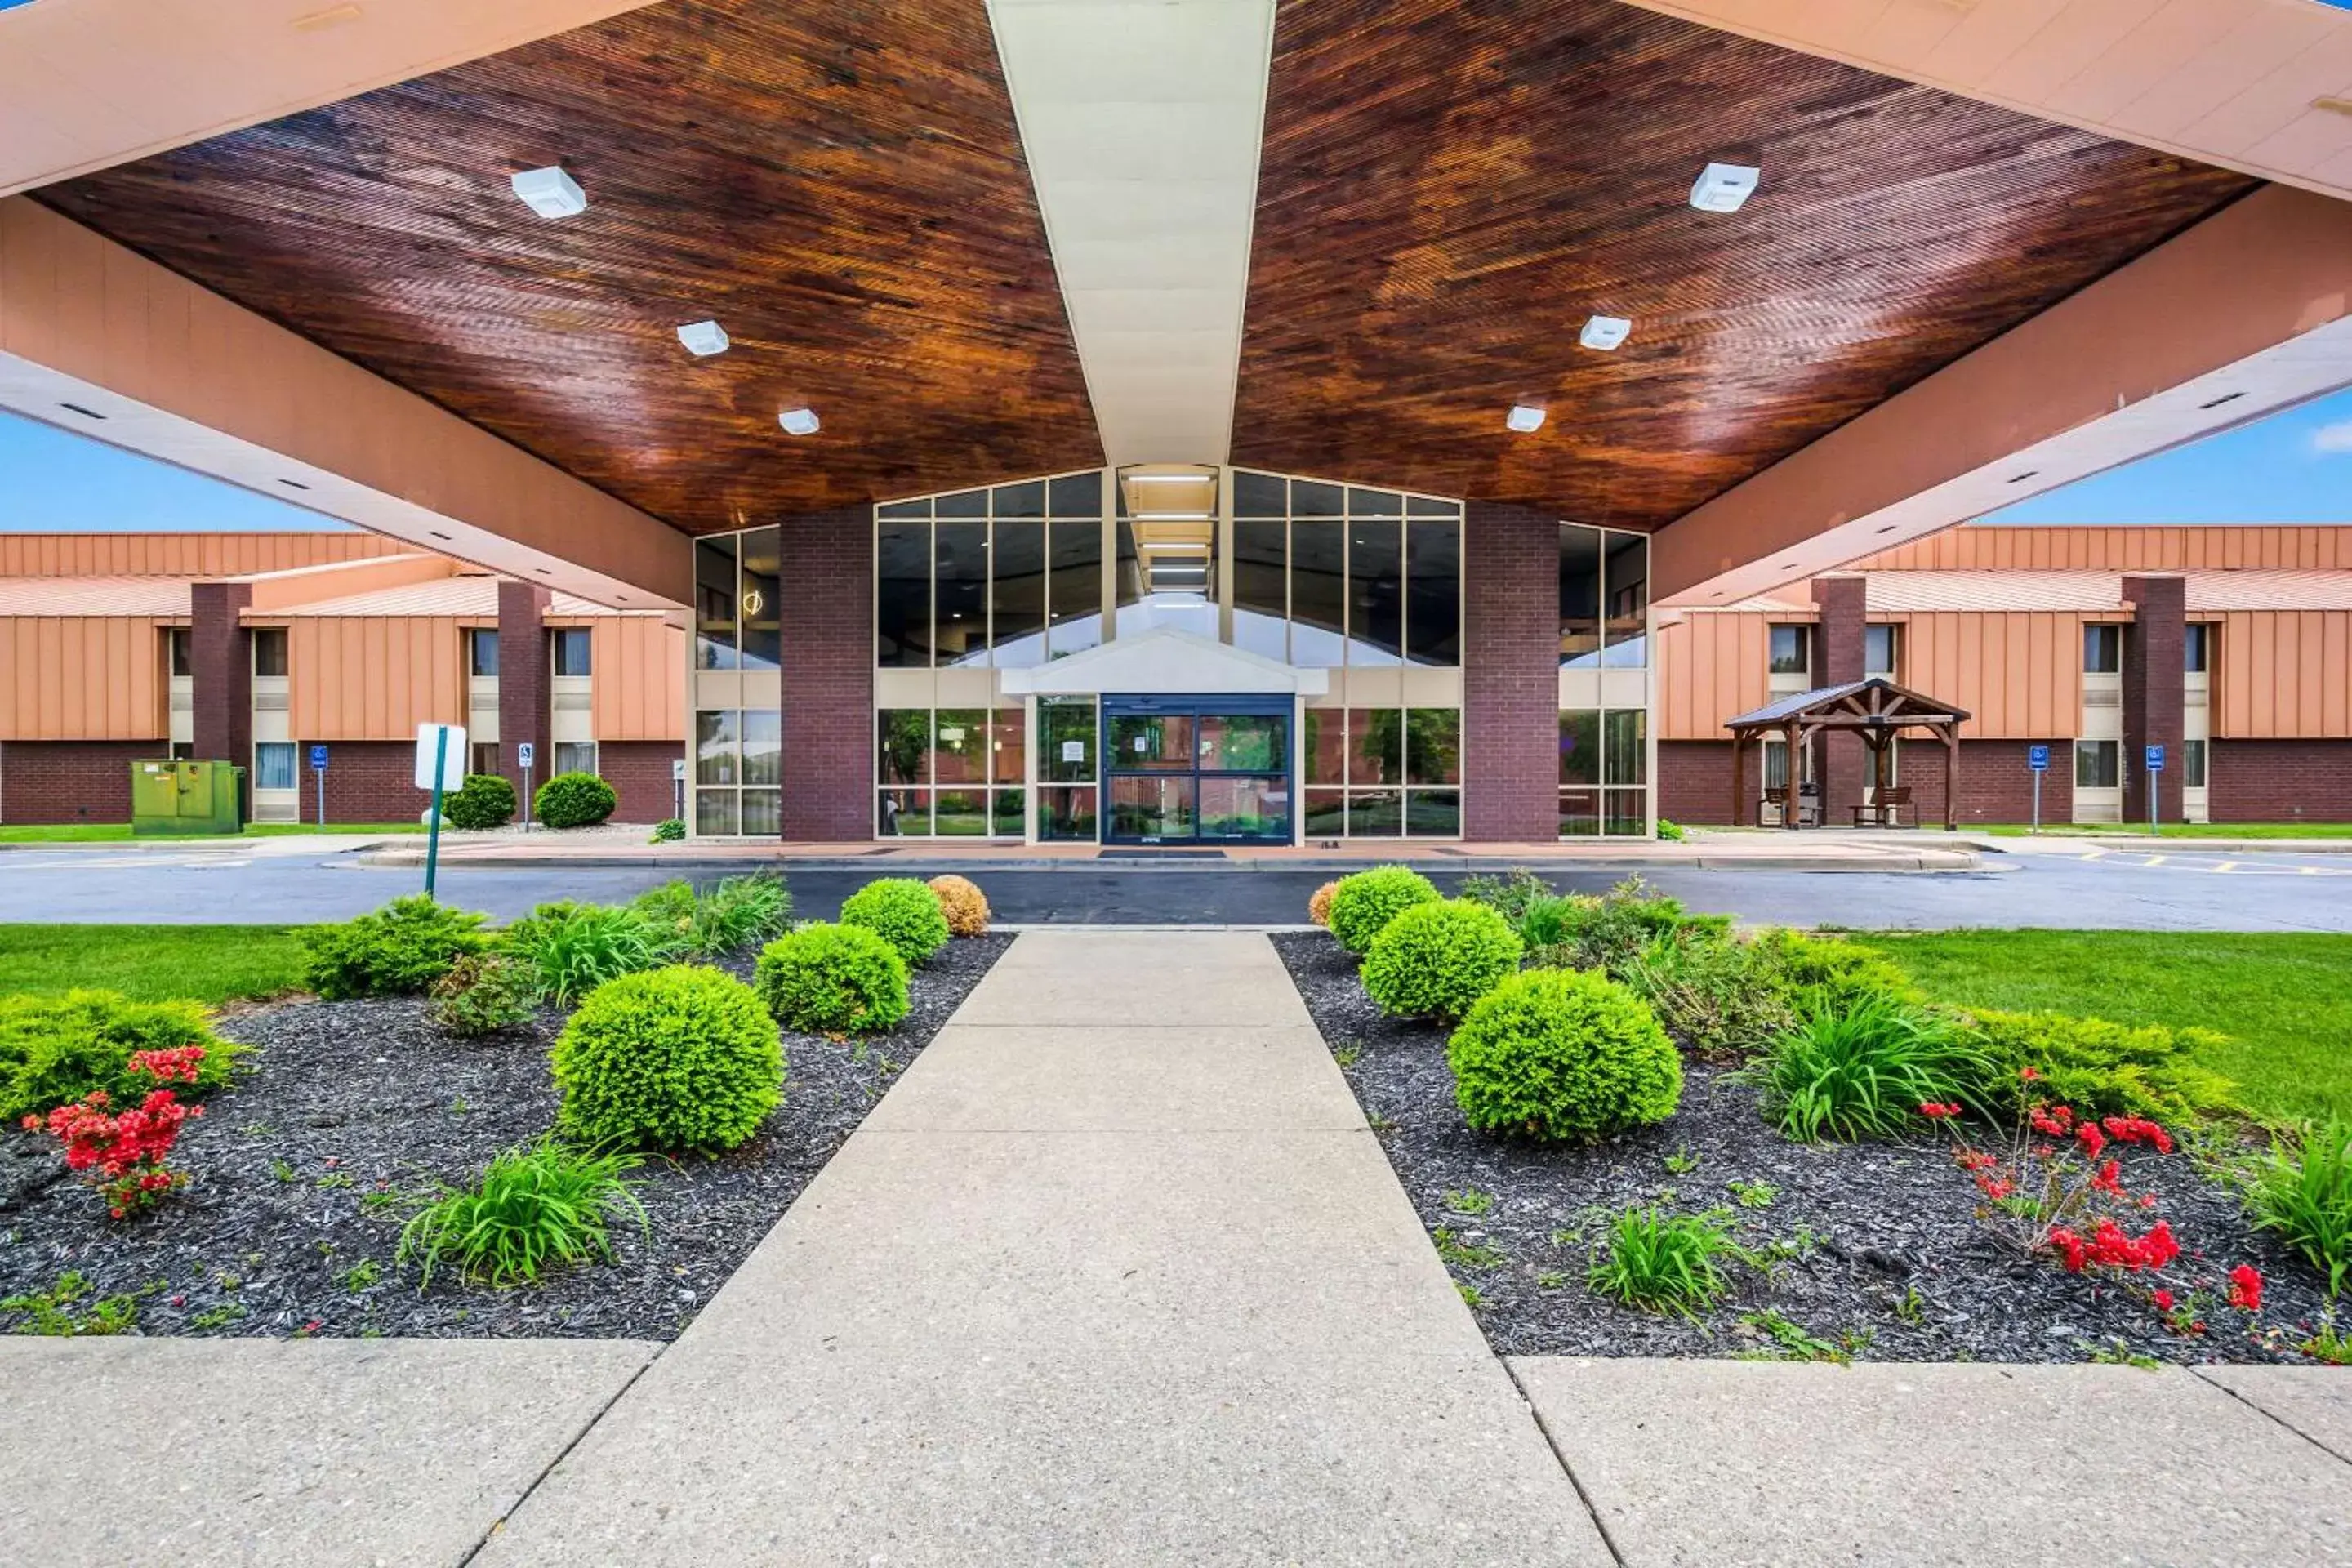 Property building in Quality Inn & Suites Florence- Cincinnati South